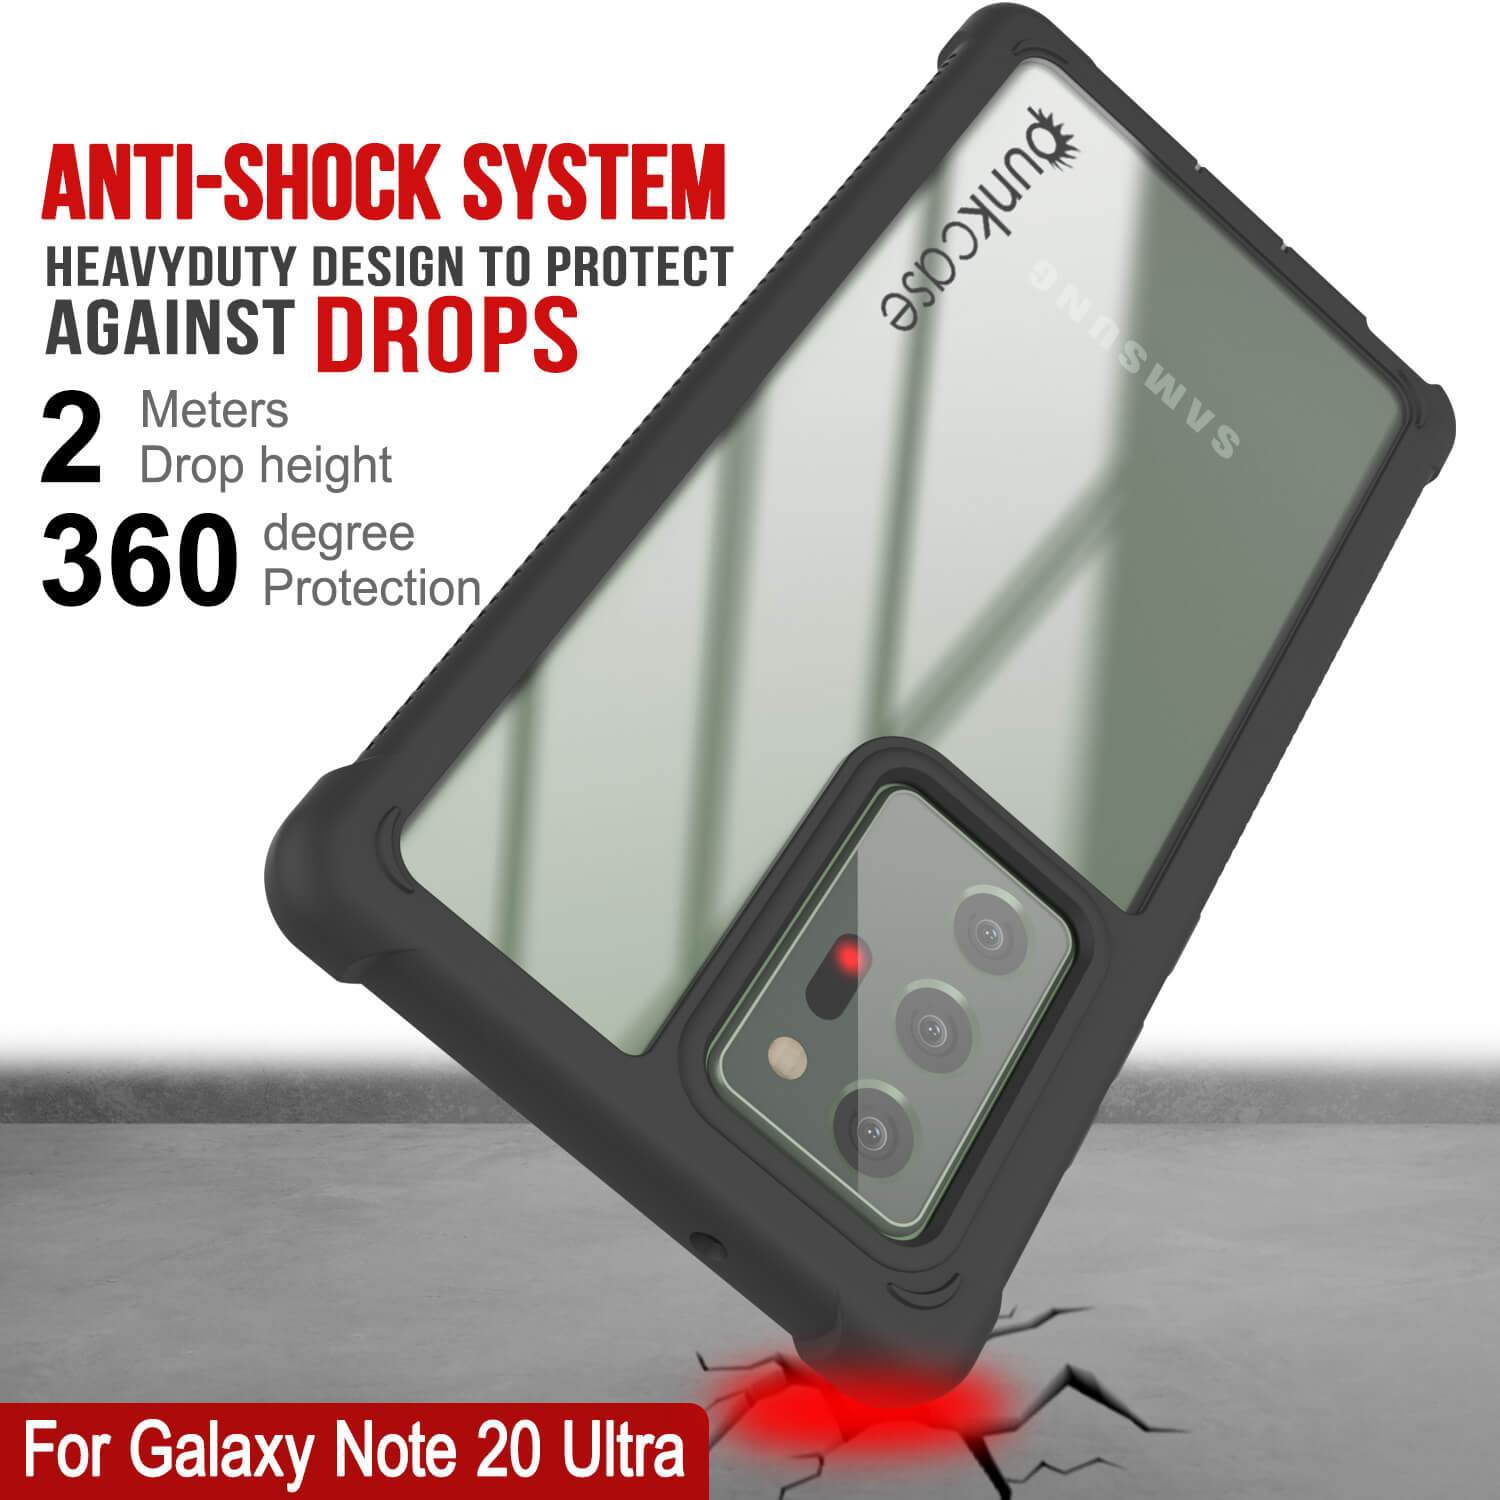 Punkcase Galaxy Note 20 Ultra Case, [Spartan Series] Black Rugged Heavy Duty Cover W/Built in Screen Protector